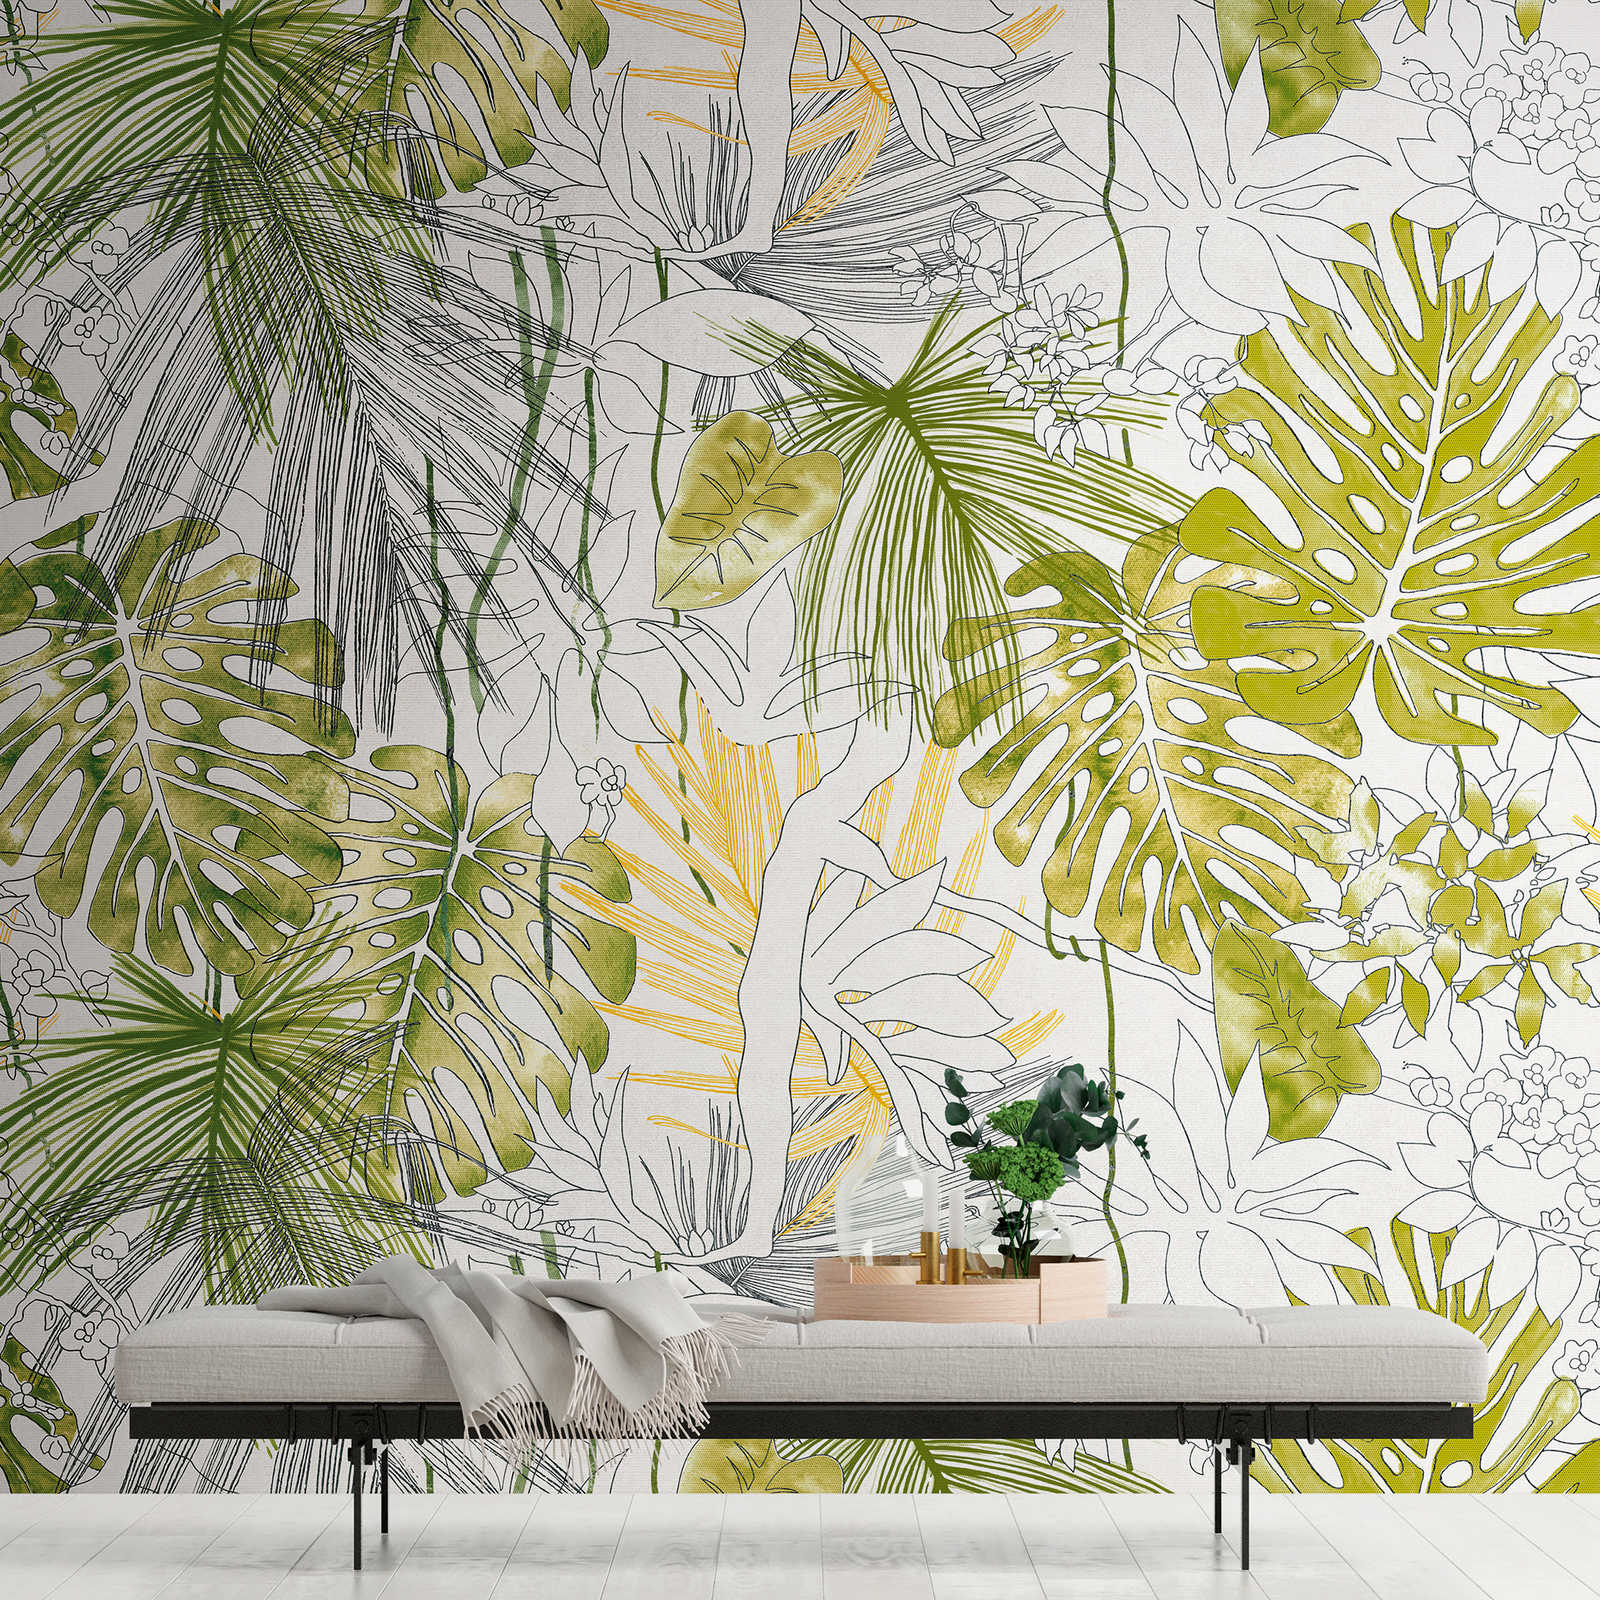 Wallpaper novelty - motif wallpaper leaves design in drawing style
